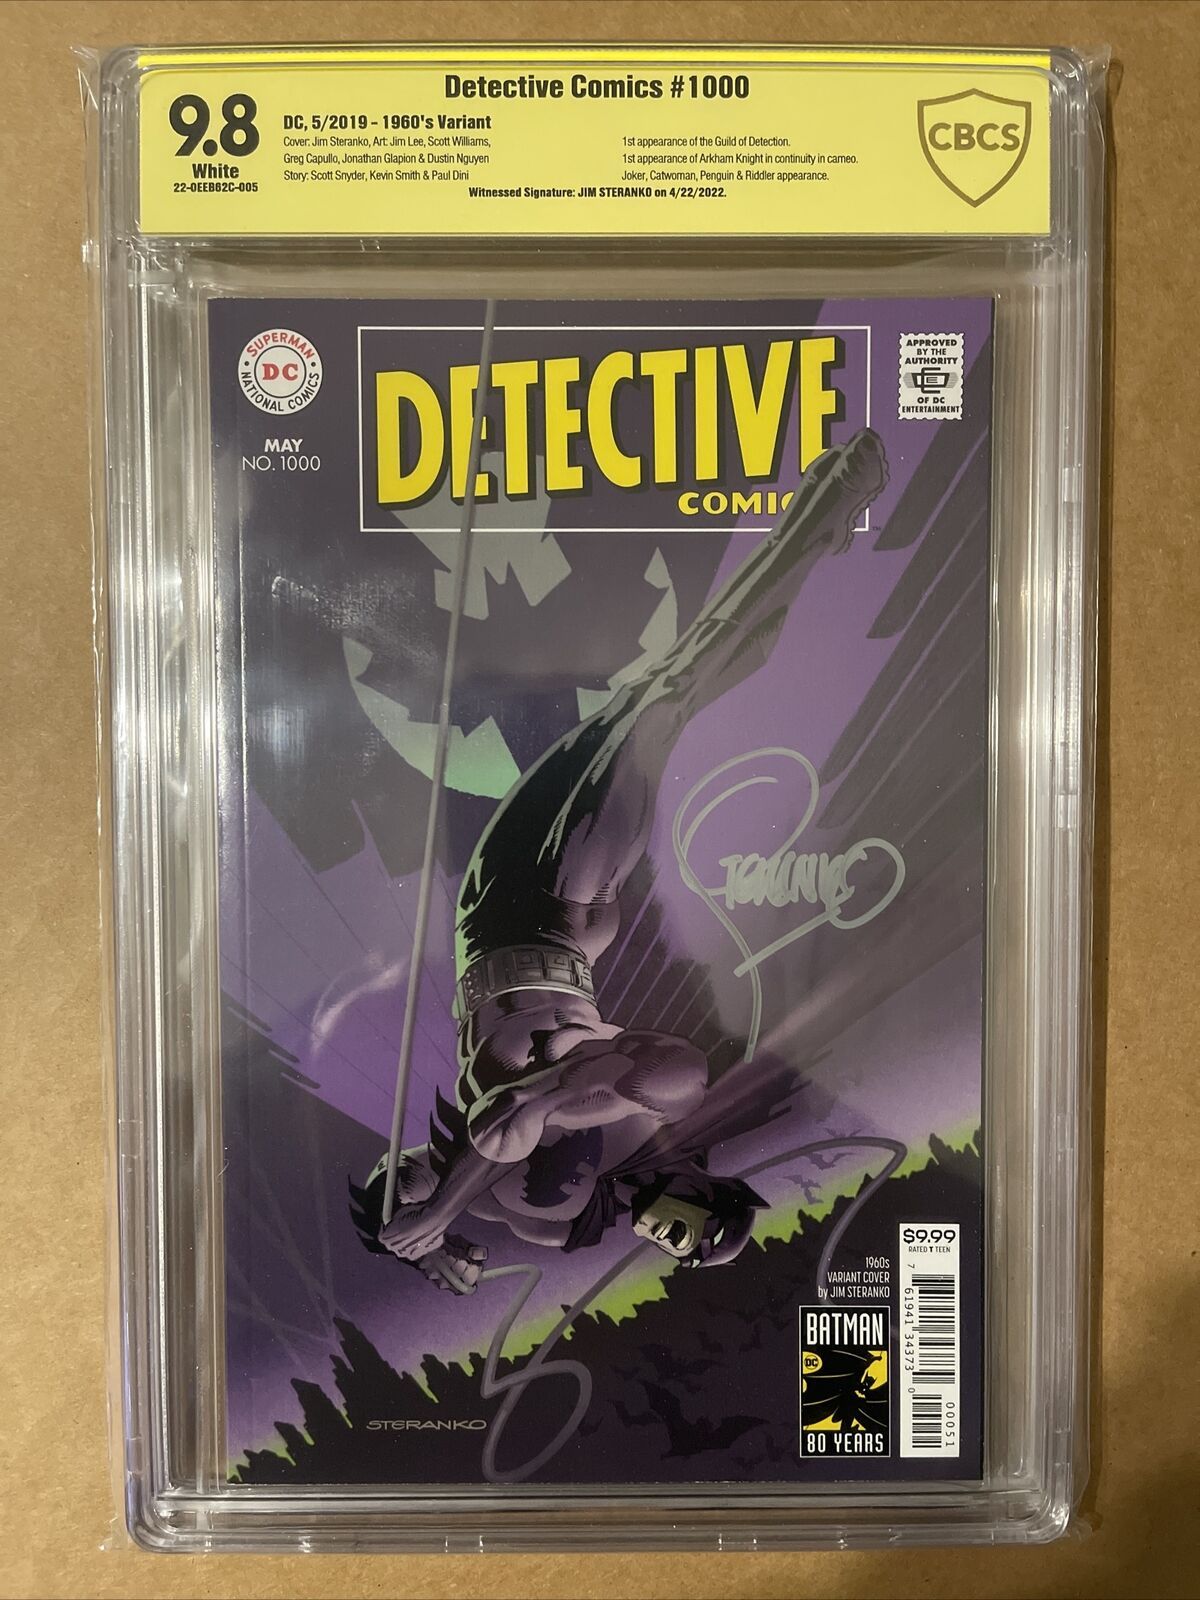 Detective Comics #1000 1960’s Variant CBCS 9.8 Signed By Jim Steranko